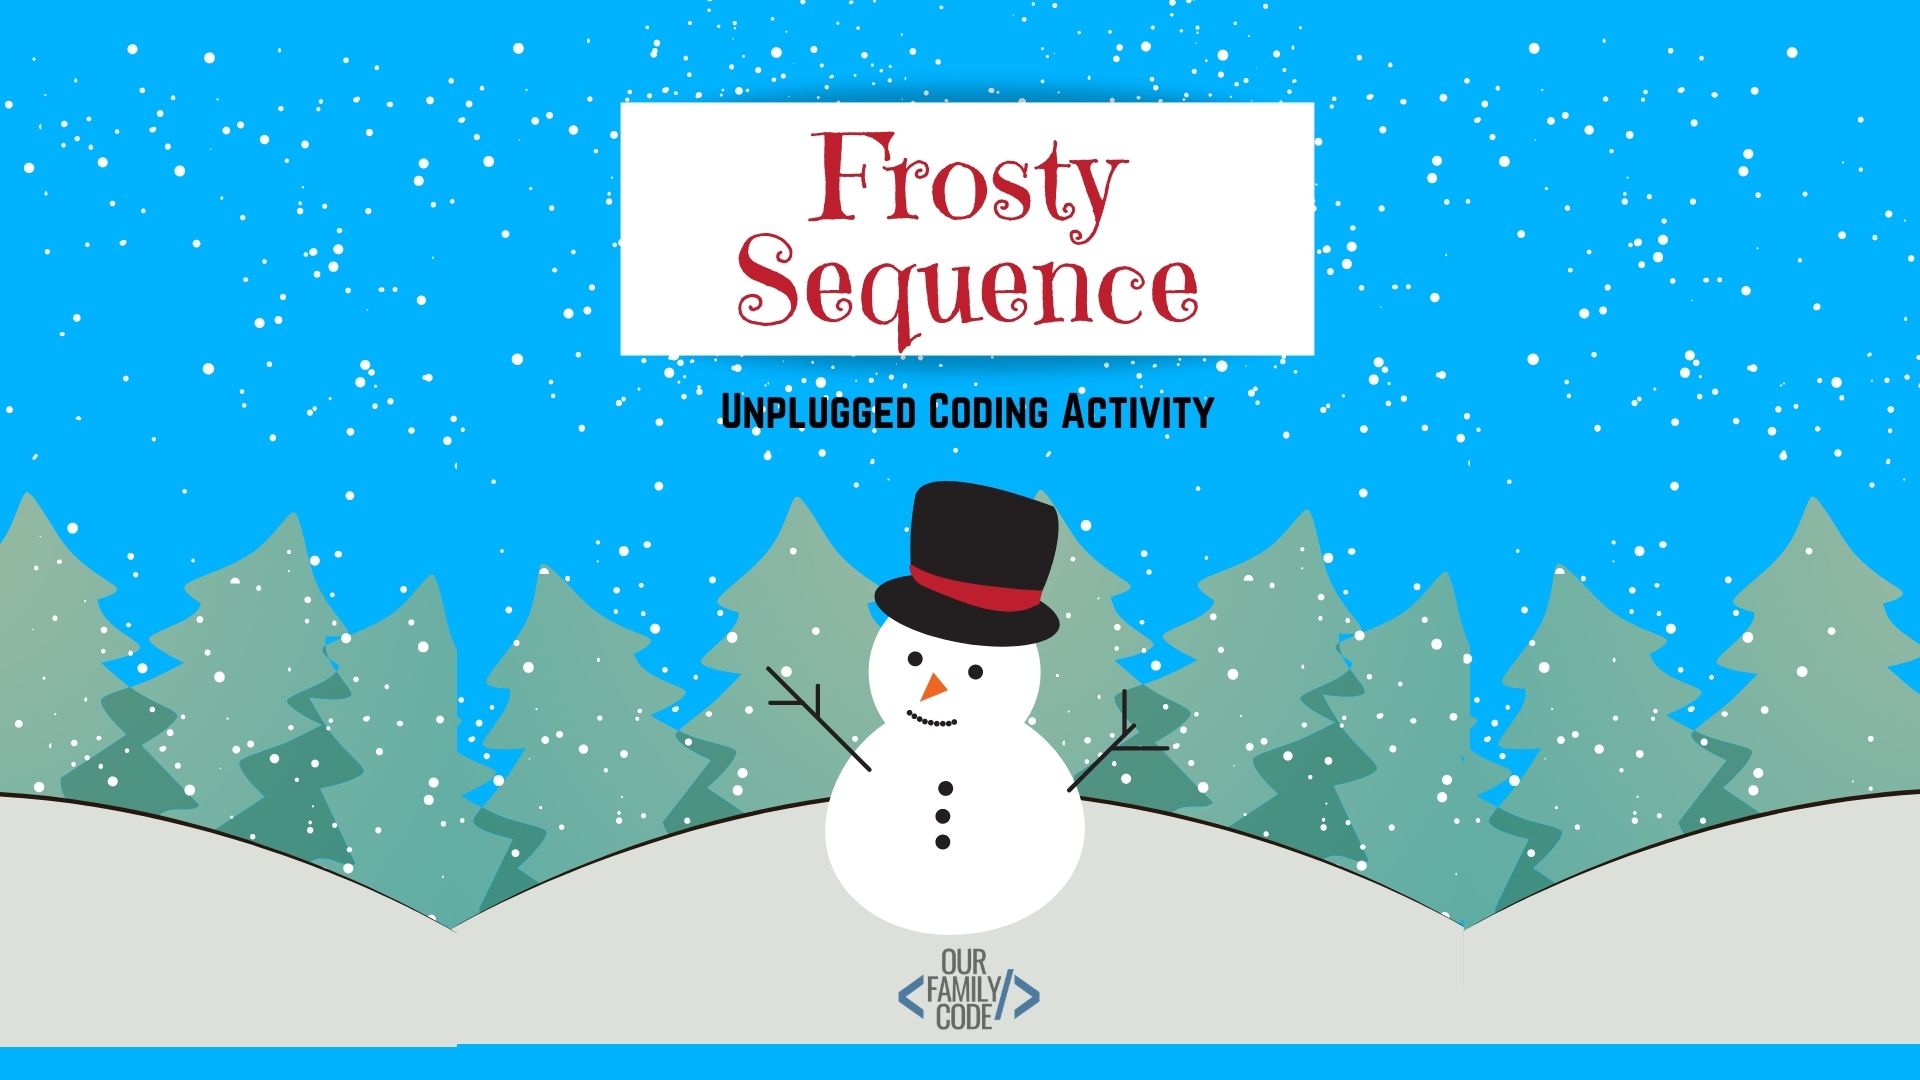 Find the correct sequence to help Frosty the Snowman make his way through town before he melts away in this unplugged coding worksheet for kids! #teachkidstocode #freeworksheets #thanksgivingactivitiesforkids #STEM #STEAM #unpluggedcoding #hourofcode